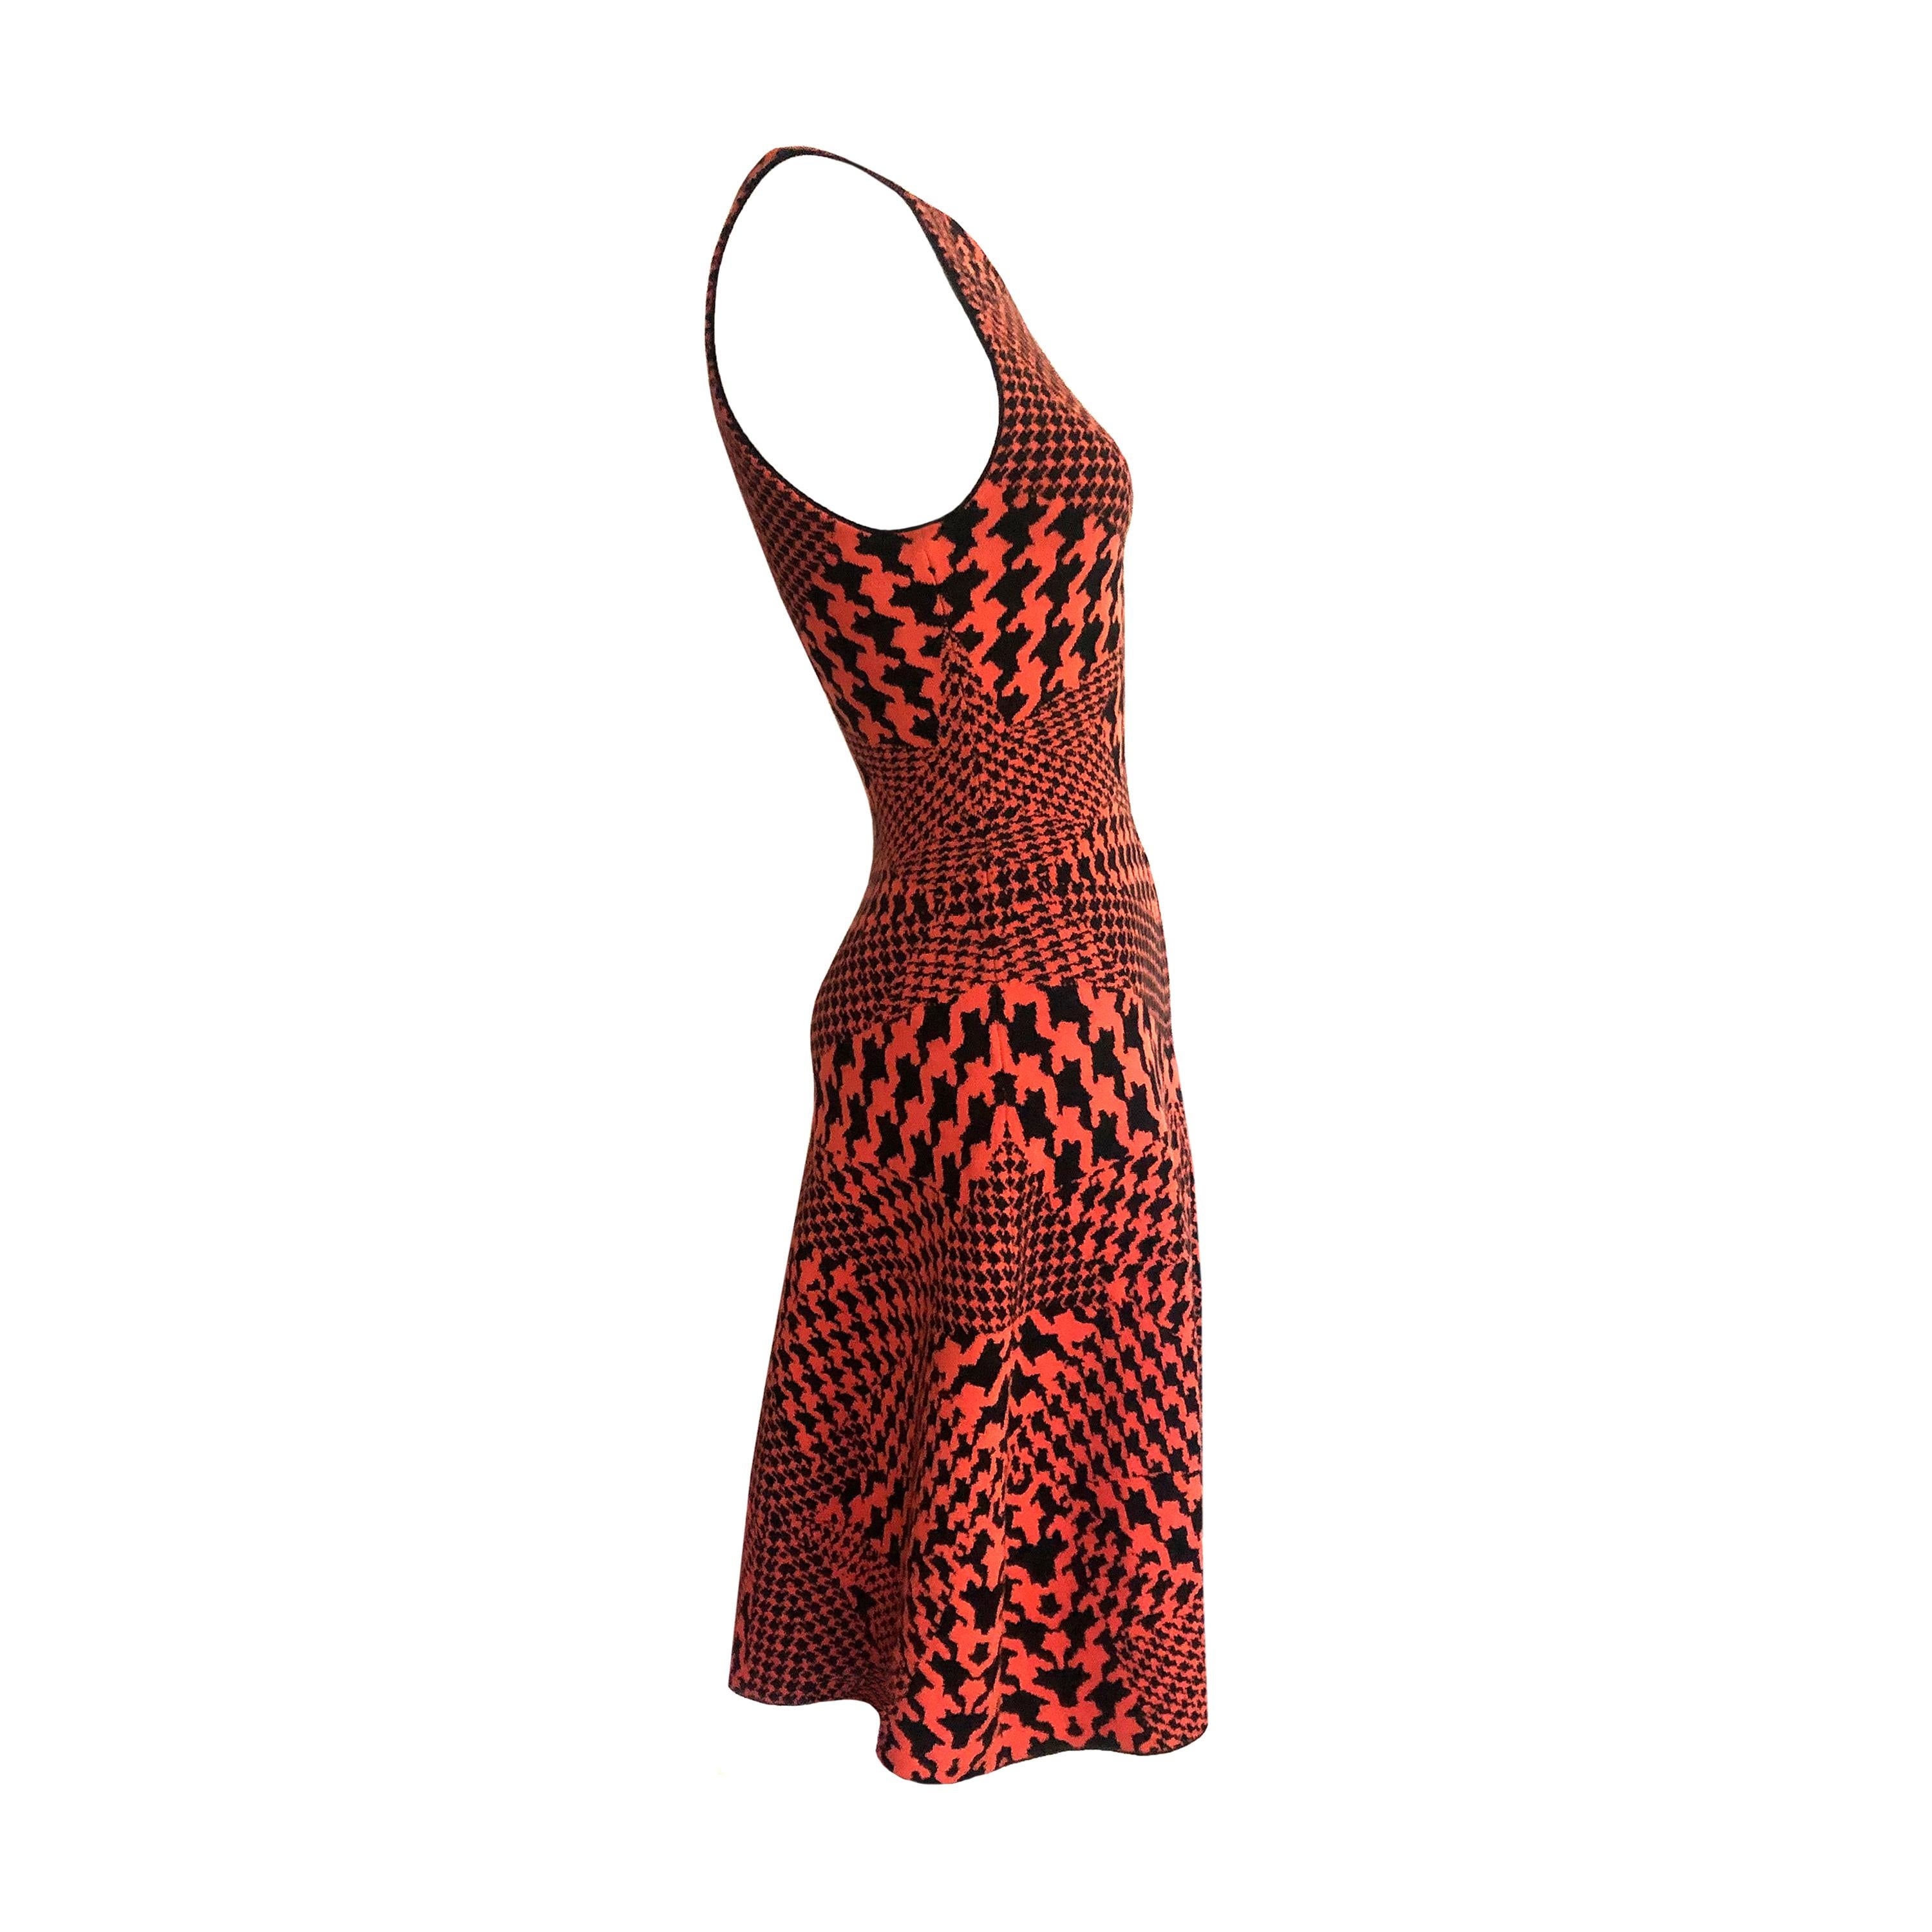 Alexander McQueen Dress - Multi Dogtooth Knit - Burnt Orange + Black In Excellent Condition For Sale In KENT, GB